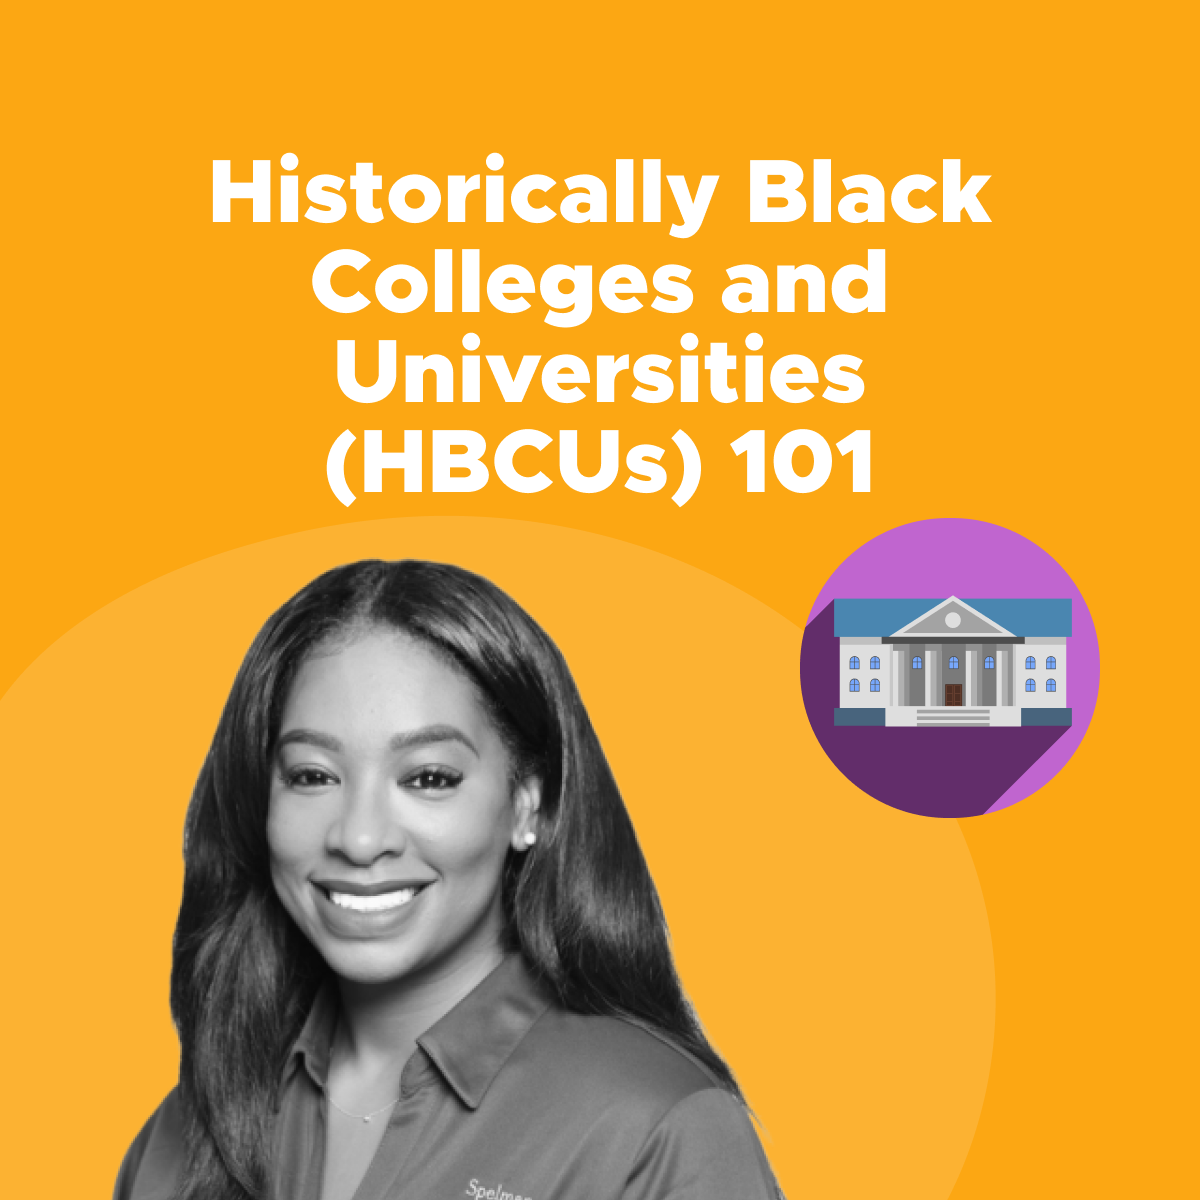 Historically Black Colleges and Universities (HBCUs) 101